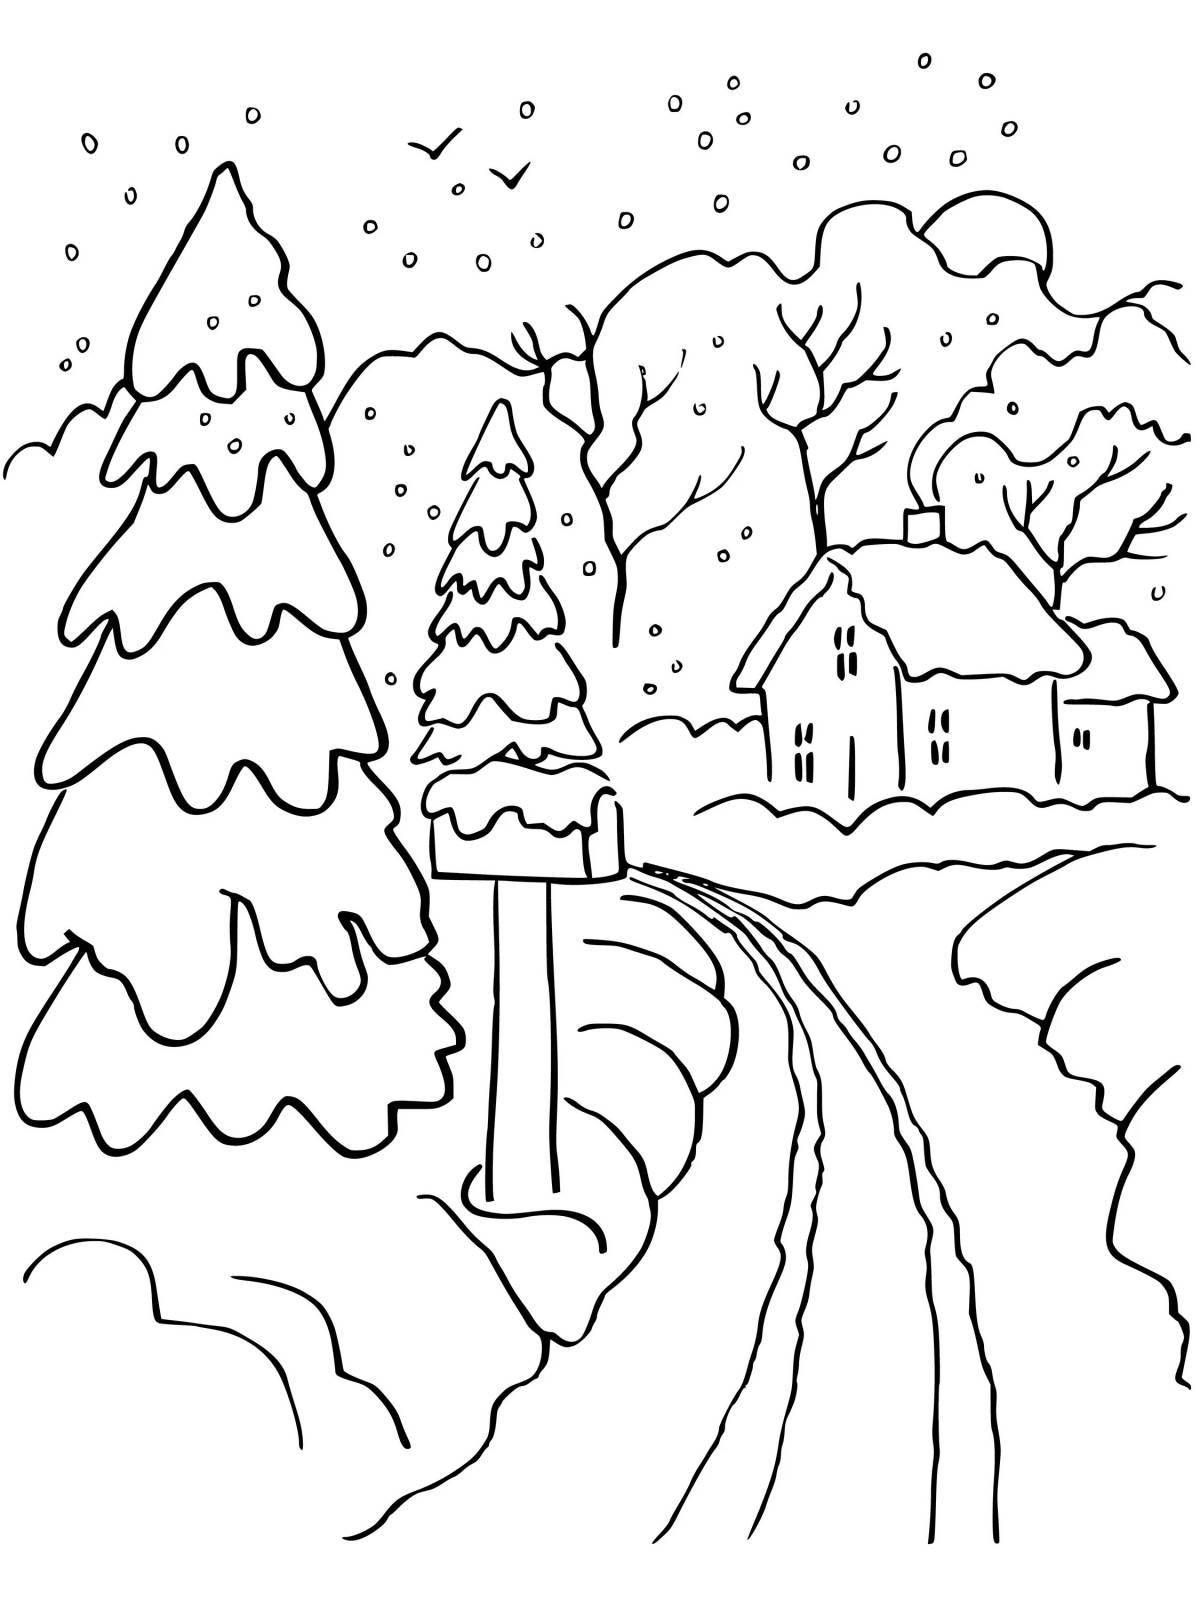 Sparkling winter nature coloring page